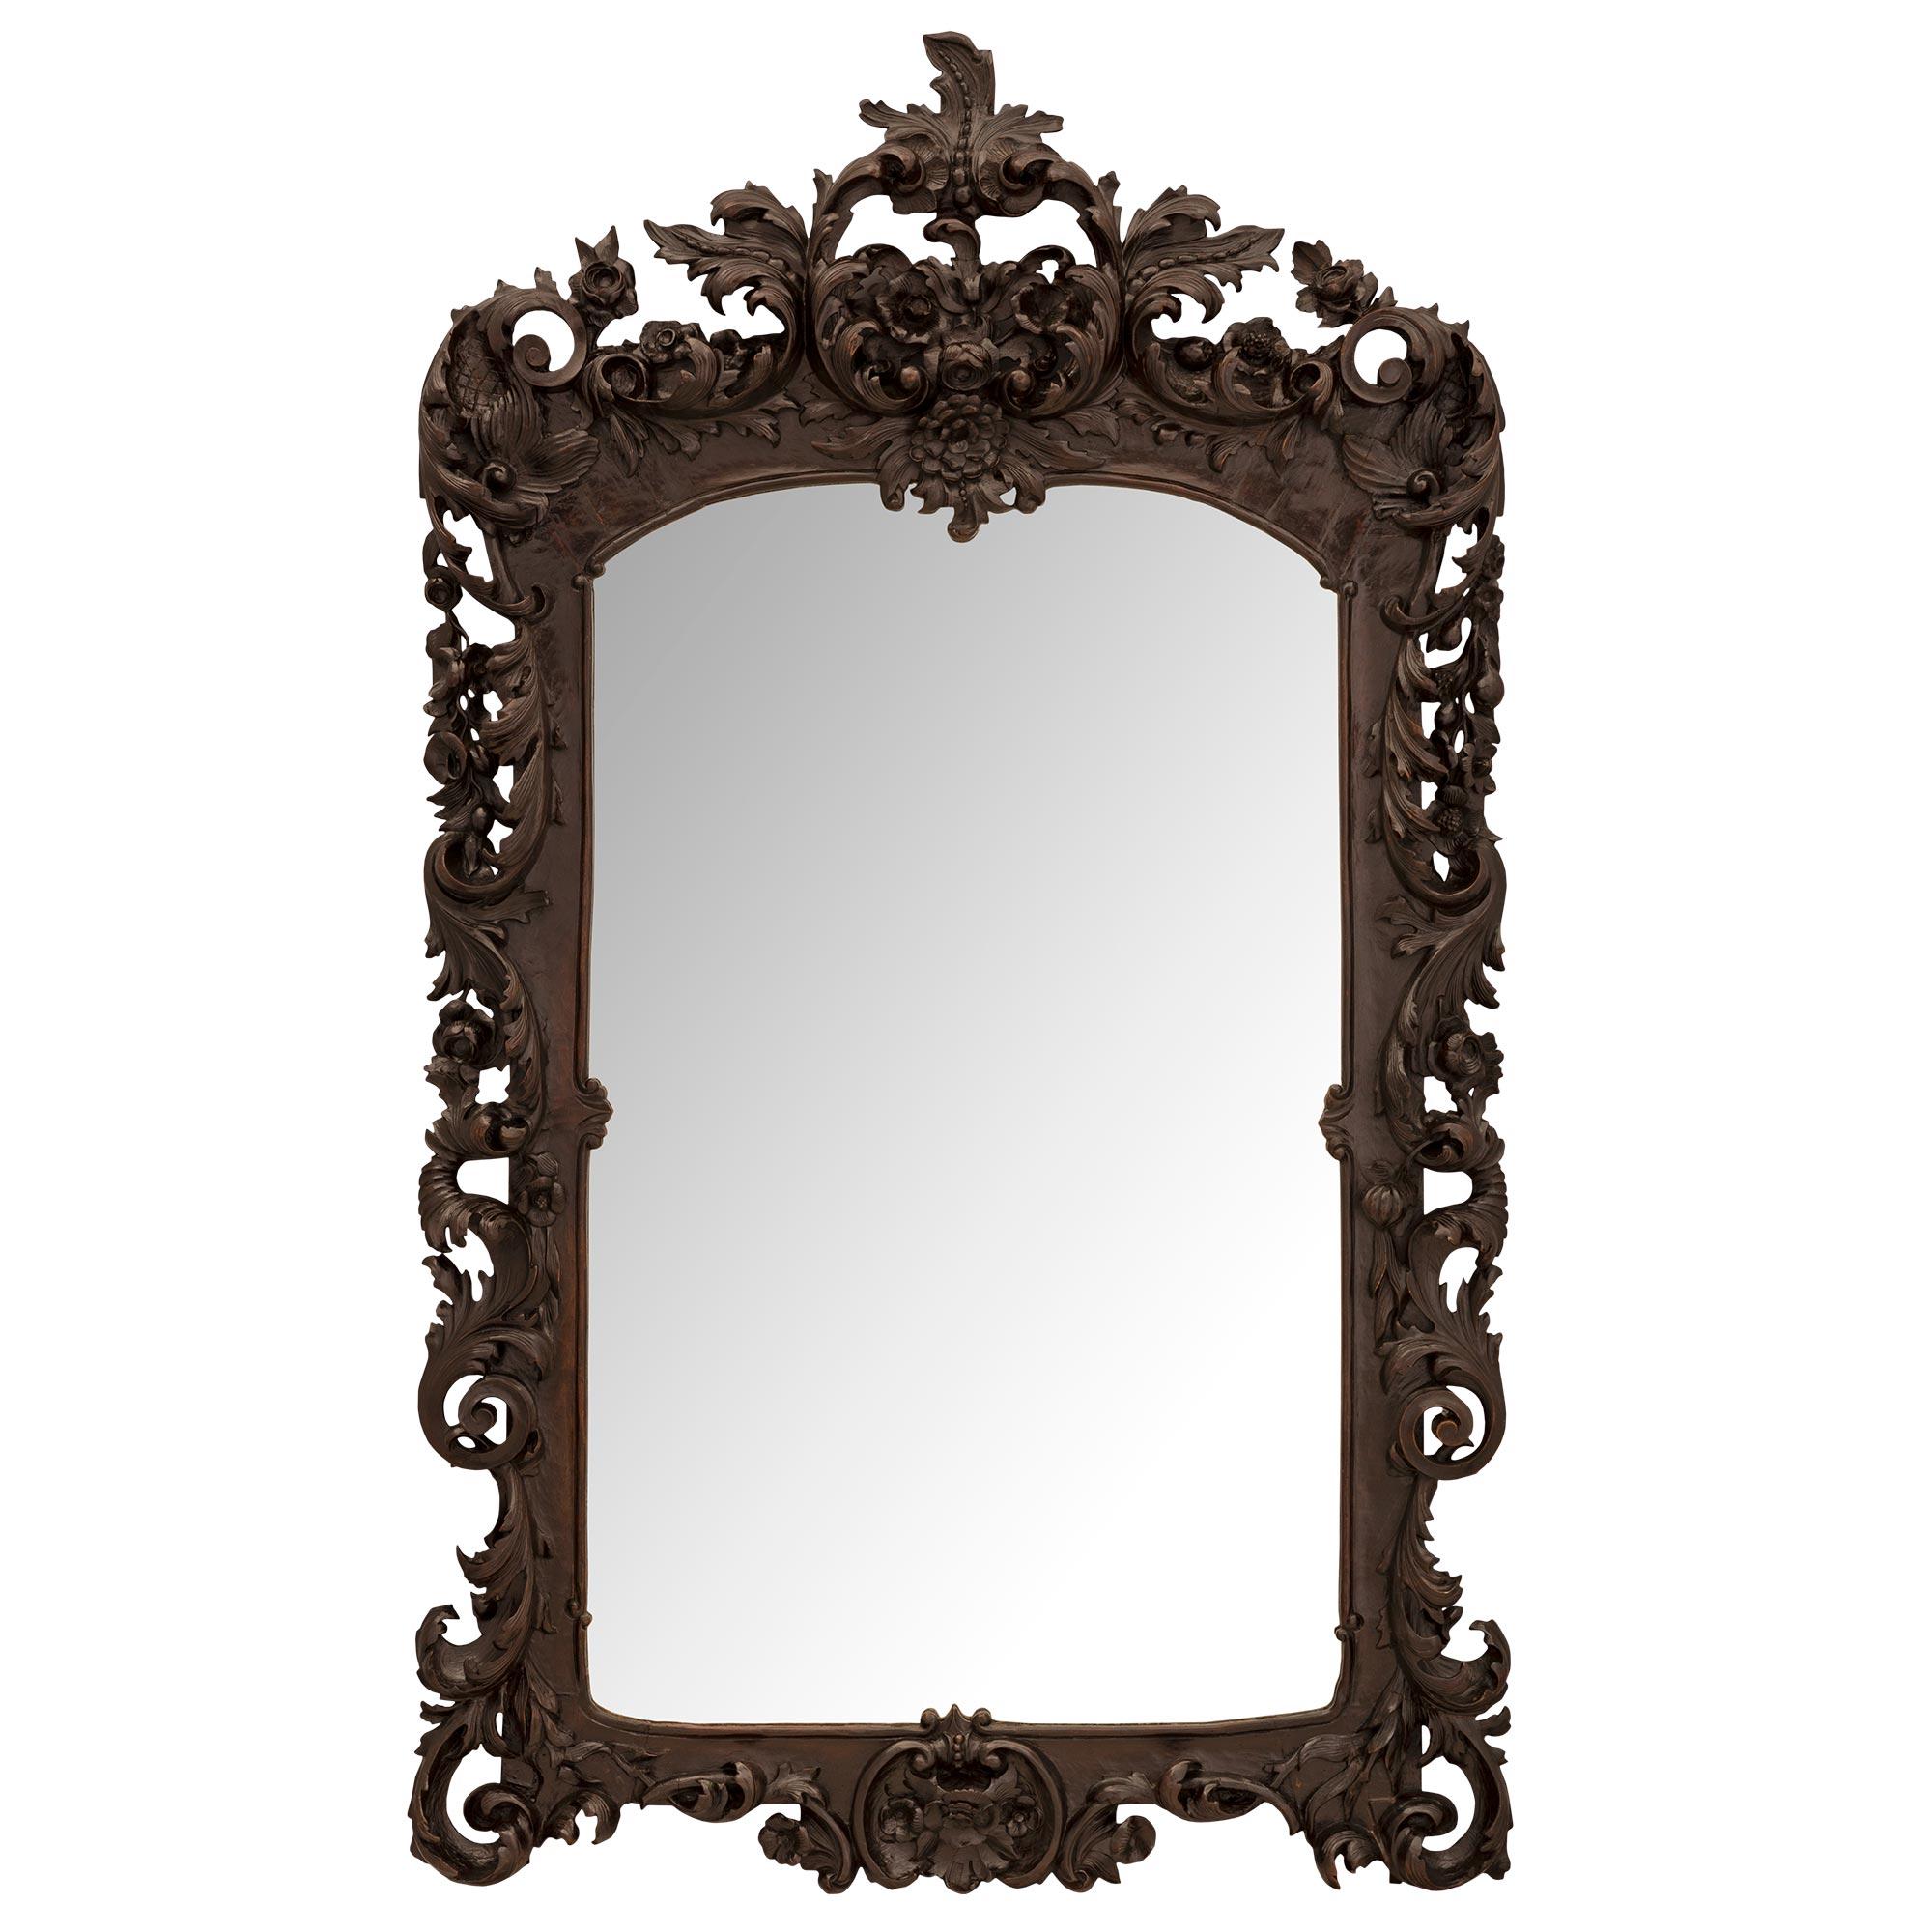 A beautiful and wonderfully executed Continental 19th century Baroque st. Walnut mirror. The mirror retains its original mirror plate framed within an elegant mottled wrap around carved fillet. Stunning richly carved scrolled acanthus leaves extend